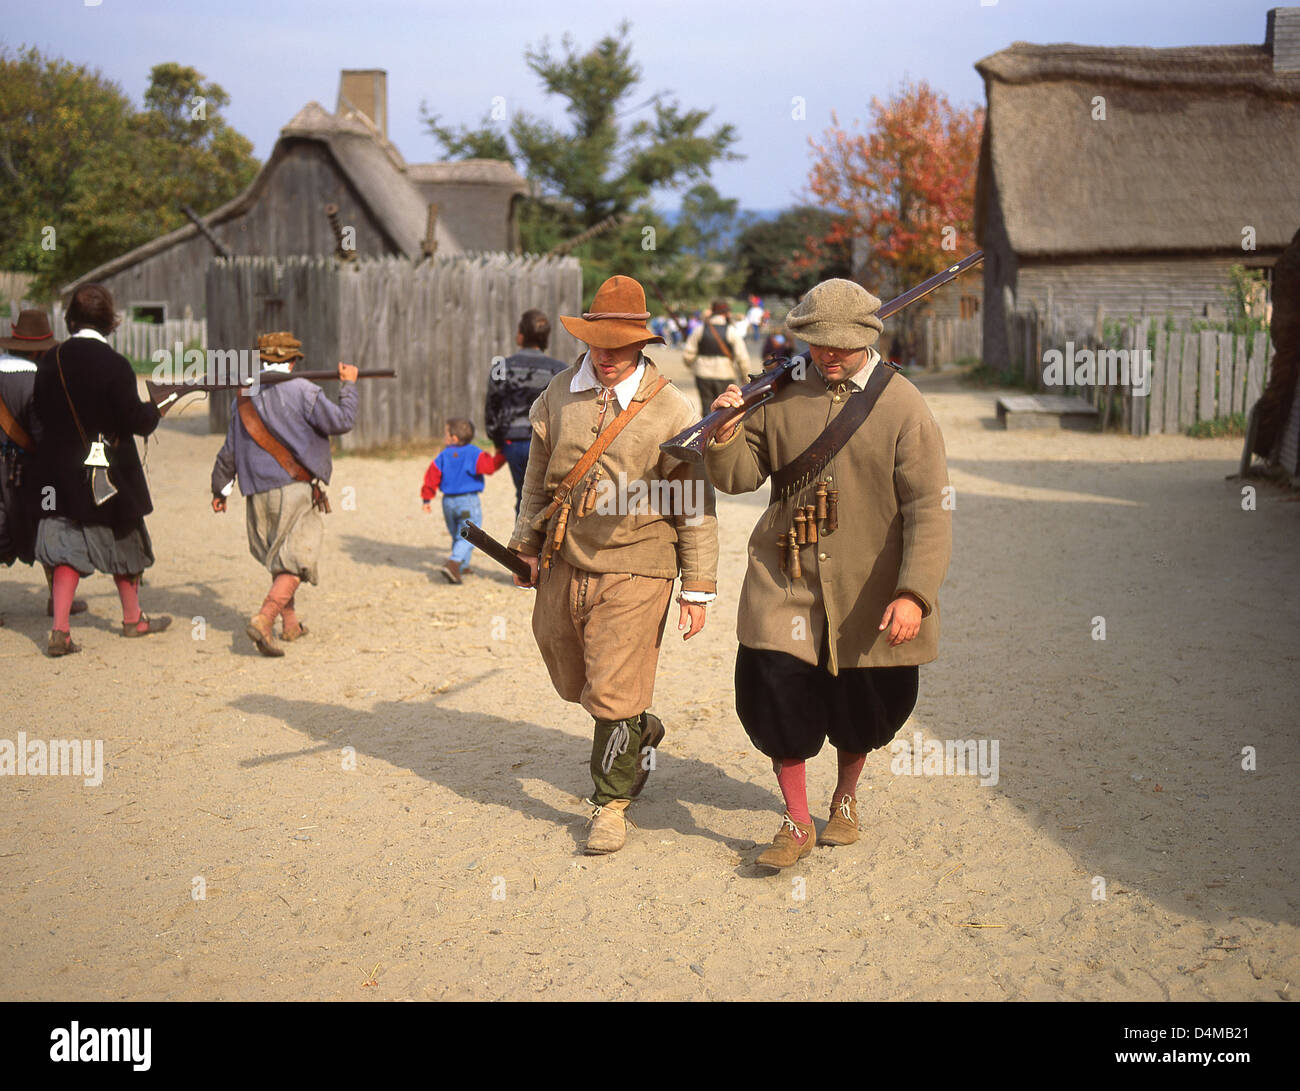 Pilgrims carrying muskets in Plimoth Plantation, Plymouth, Massachusetts, United States of America Stock Photo